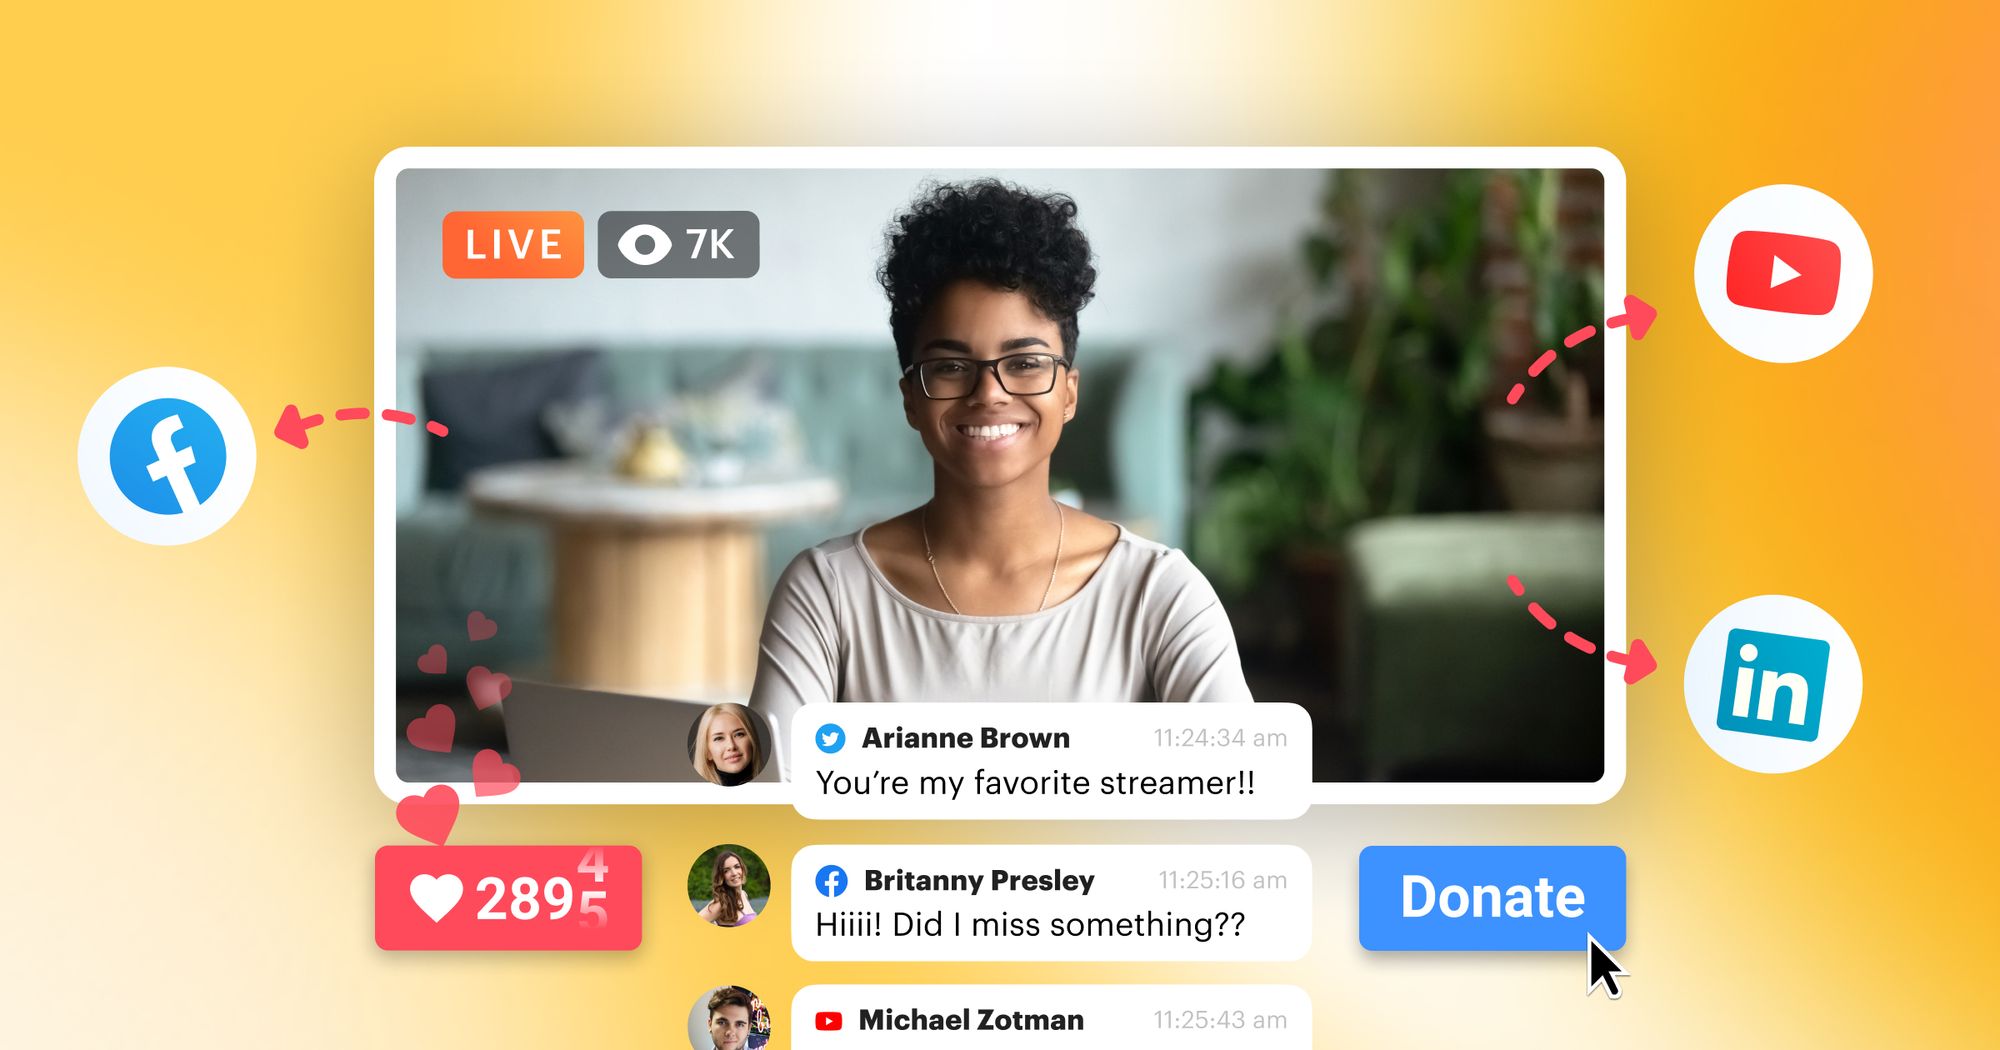 11 tips for hosting an interactive live streaming session